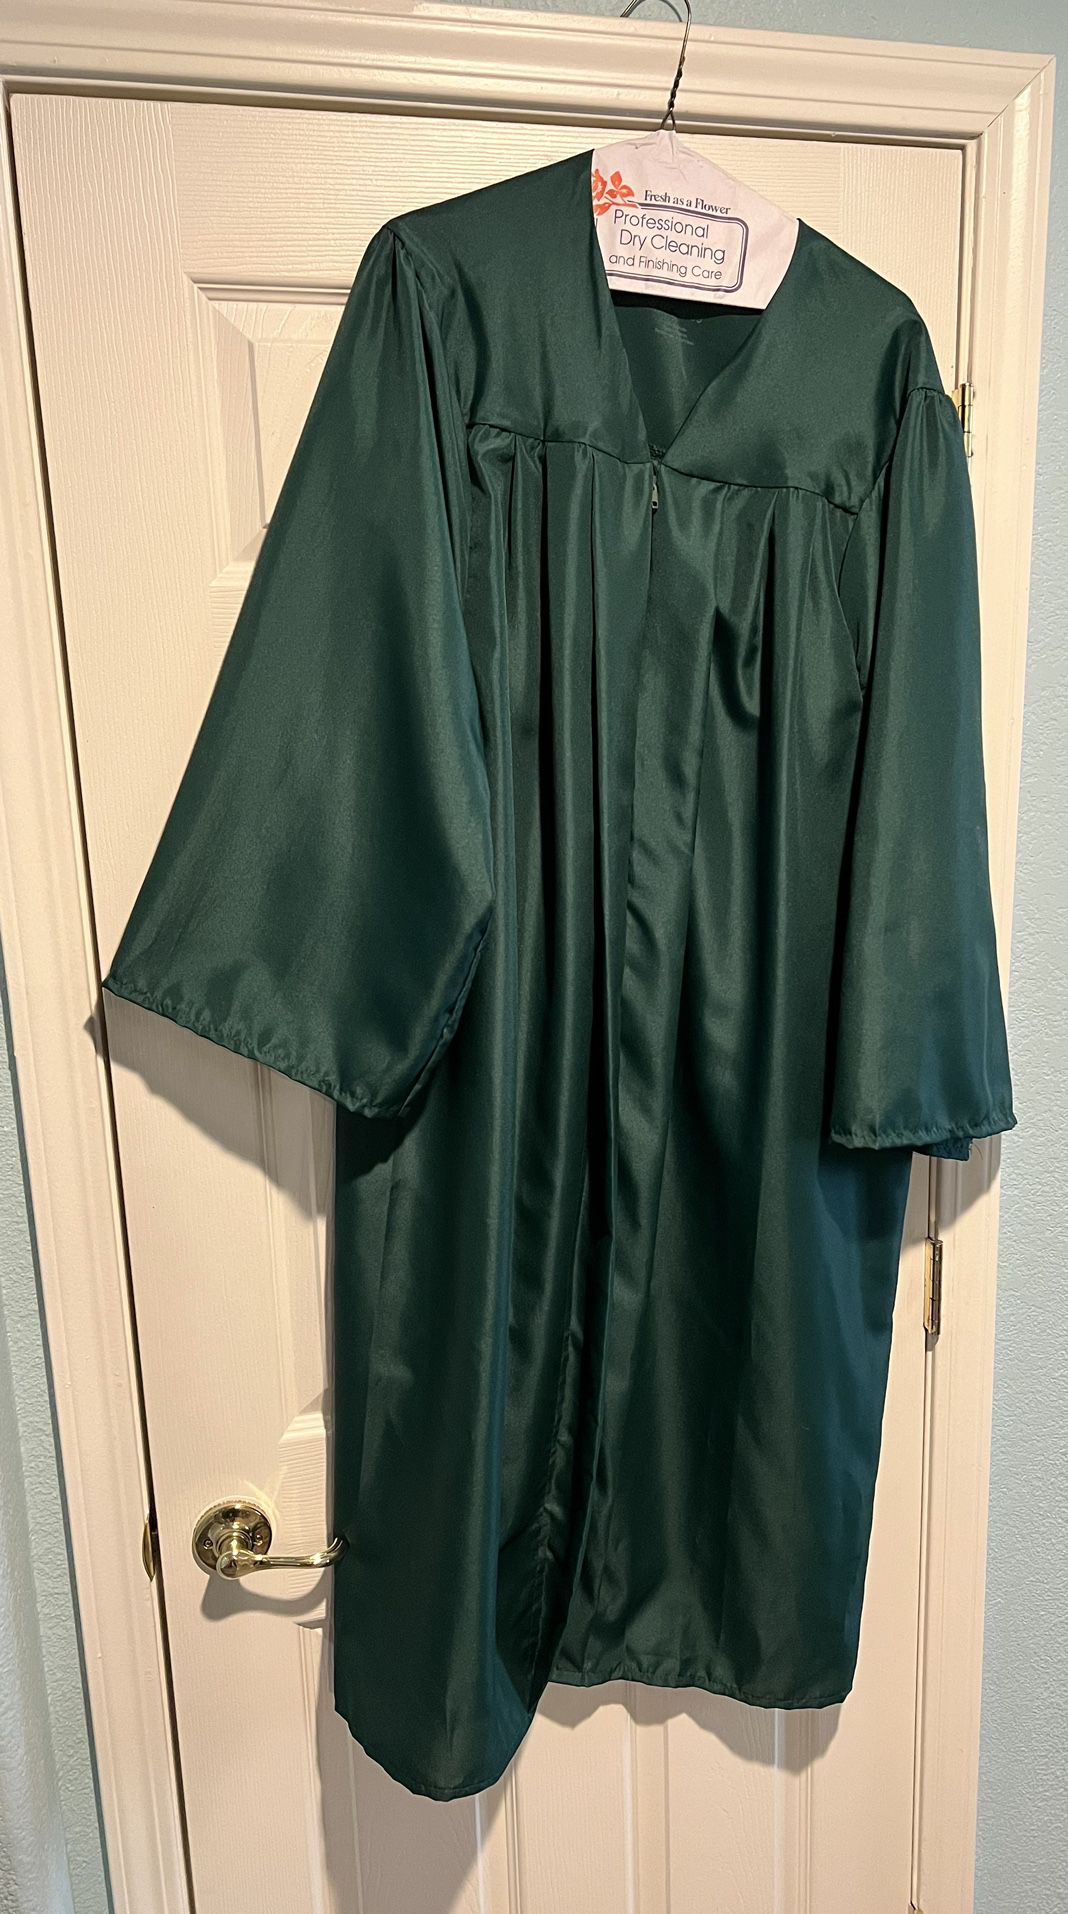 Graduation gown -new